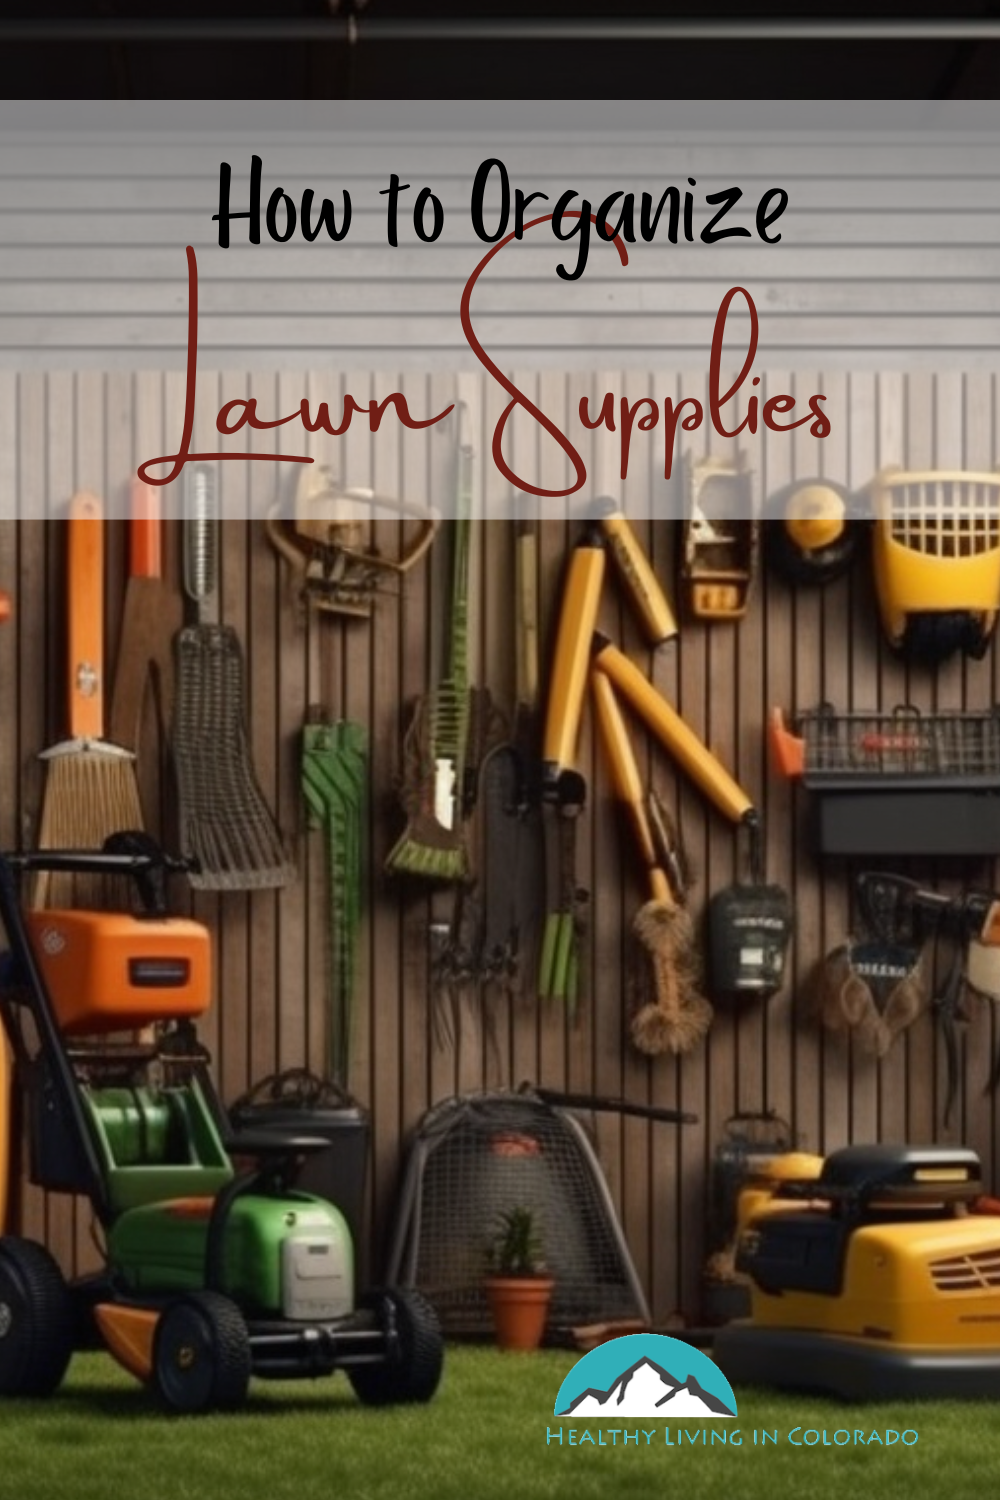 how to organize lawn supplies